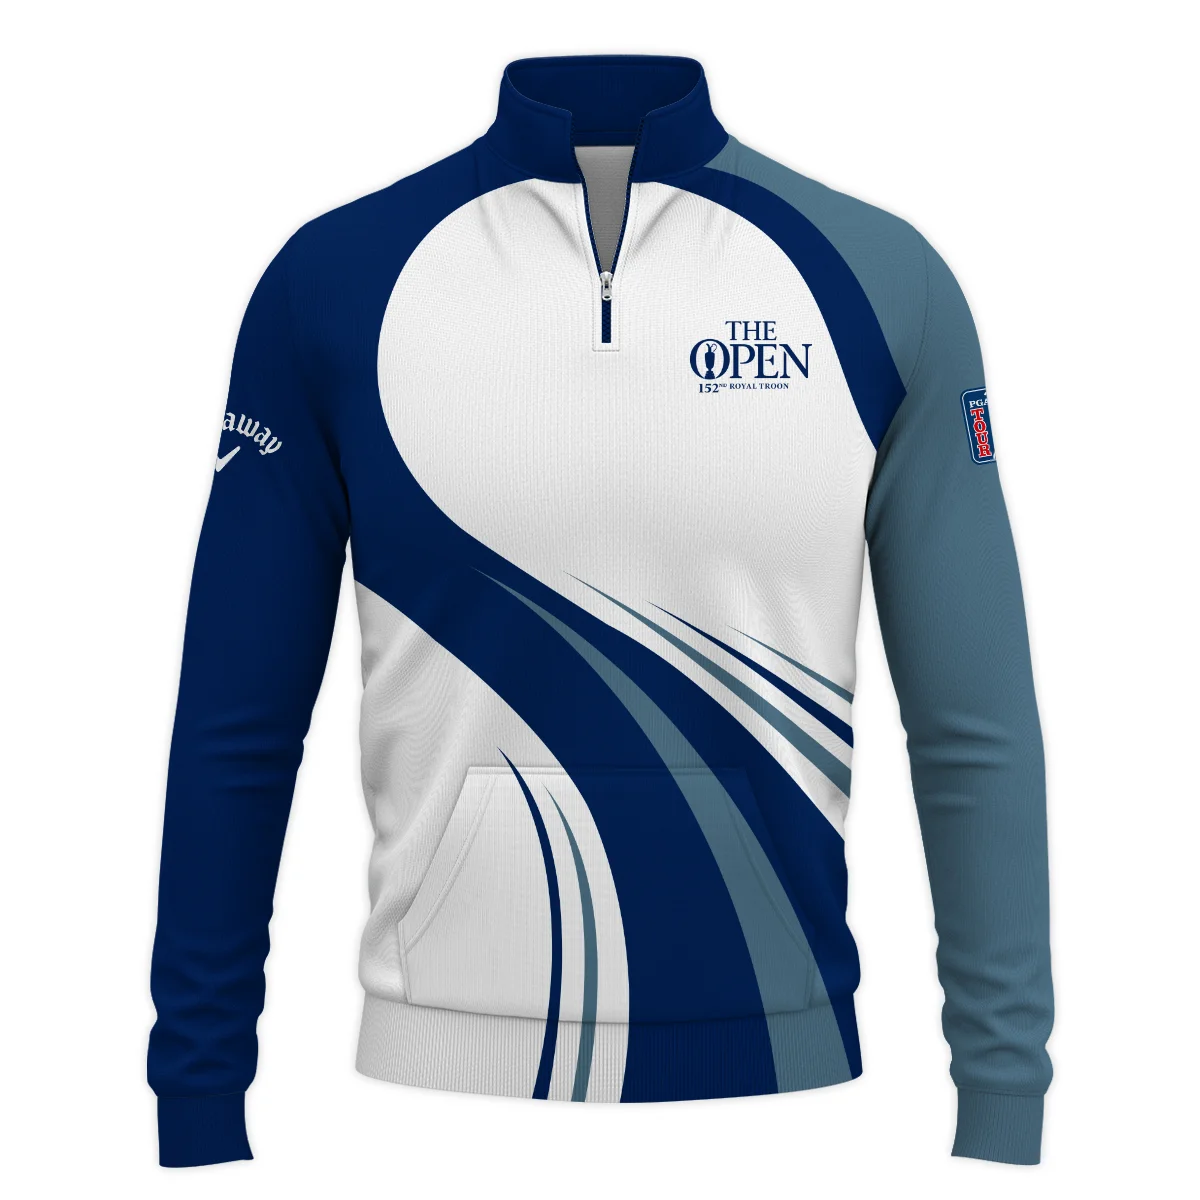 152nd Open Championship Callaway White Mostly Desaturated Dark Blue Quarter-Zip Jacket All Over Prints HOTOP270624A02CLWSWZ